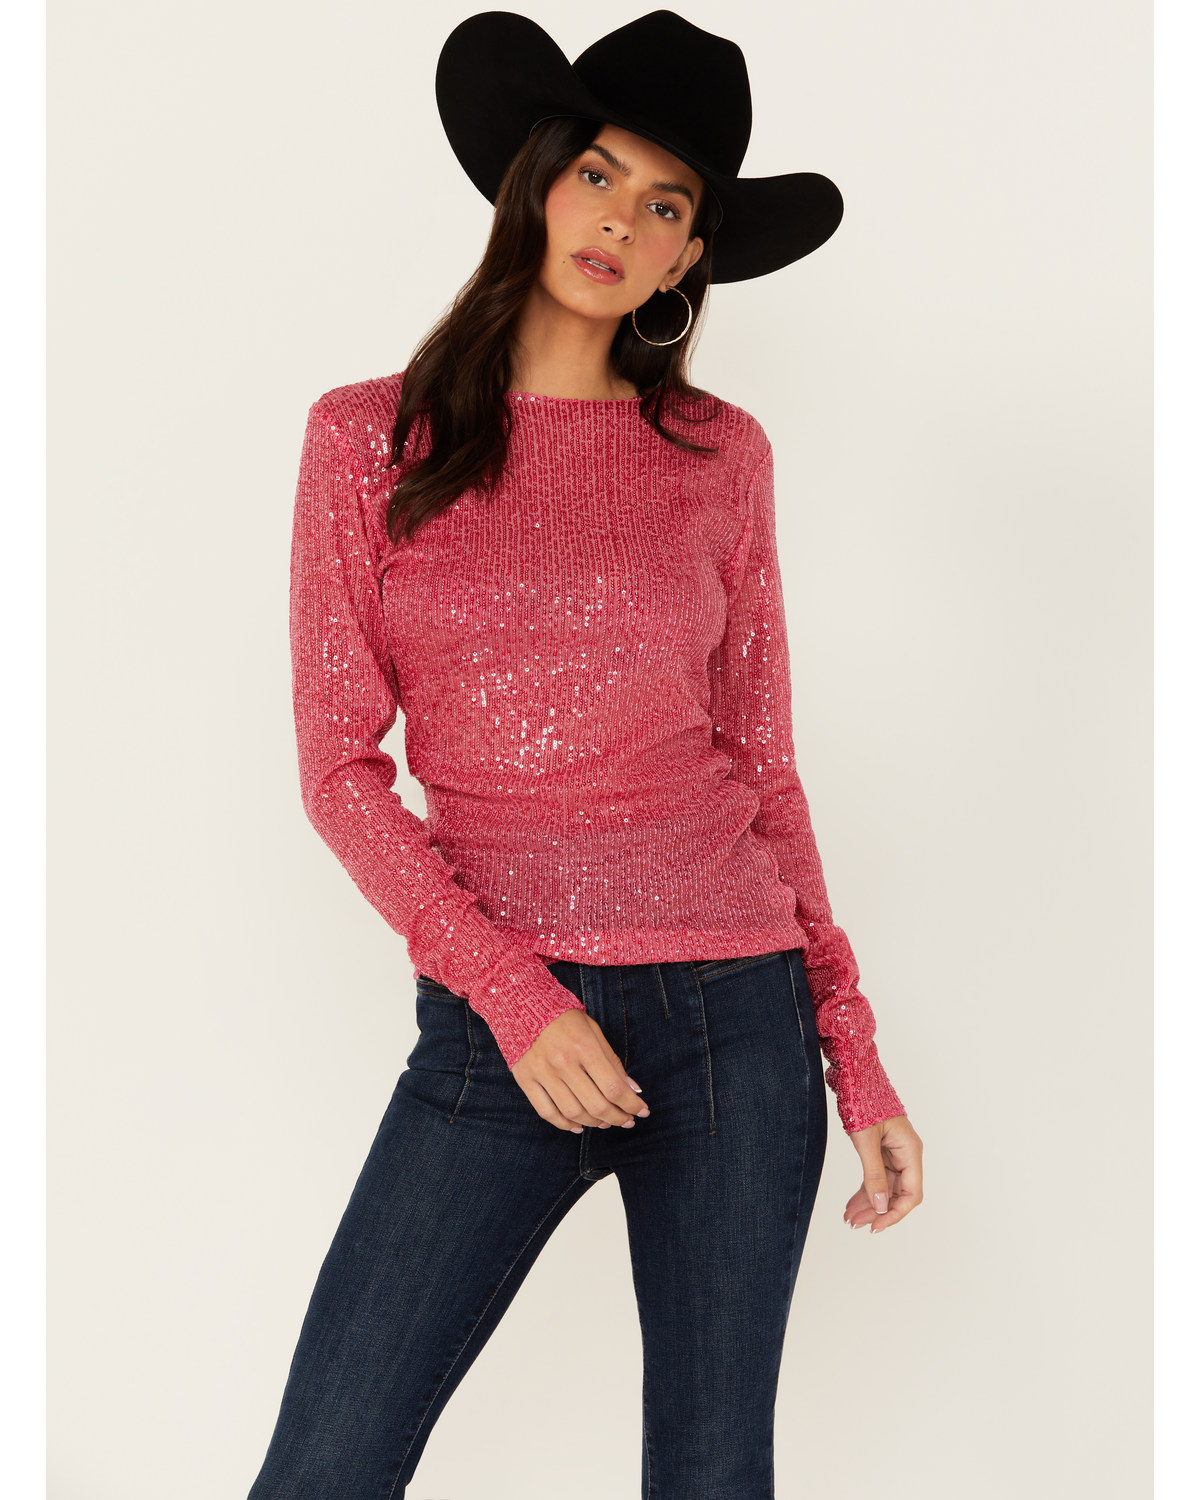 Free People Women's Sequins Gold Rush Long Sleeve Top